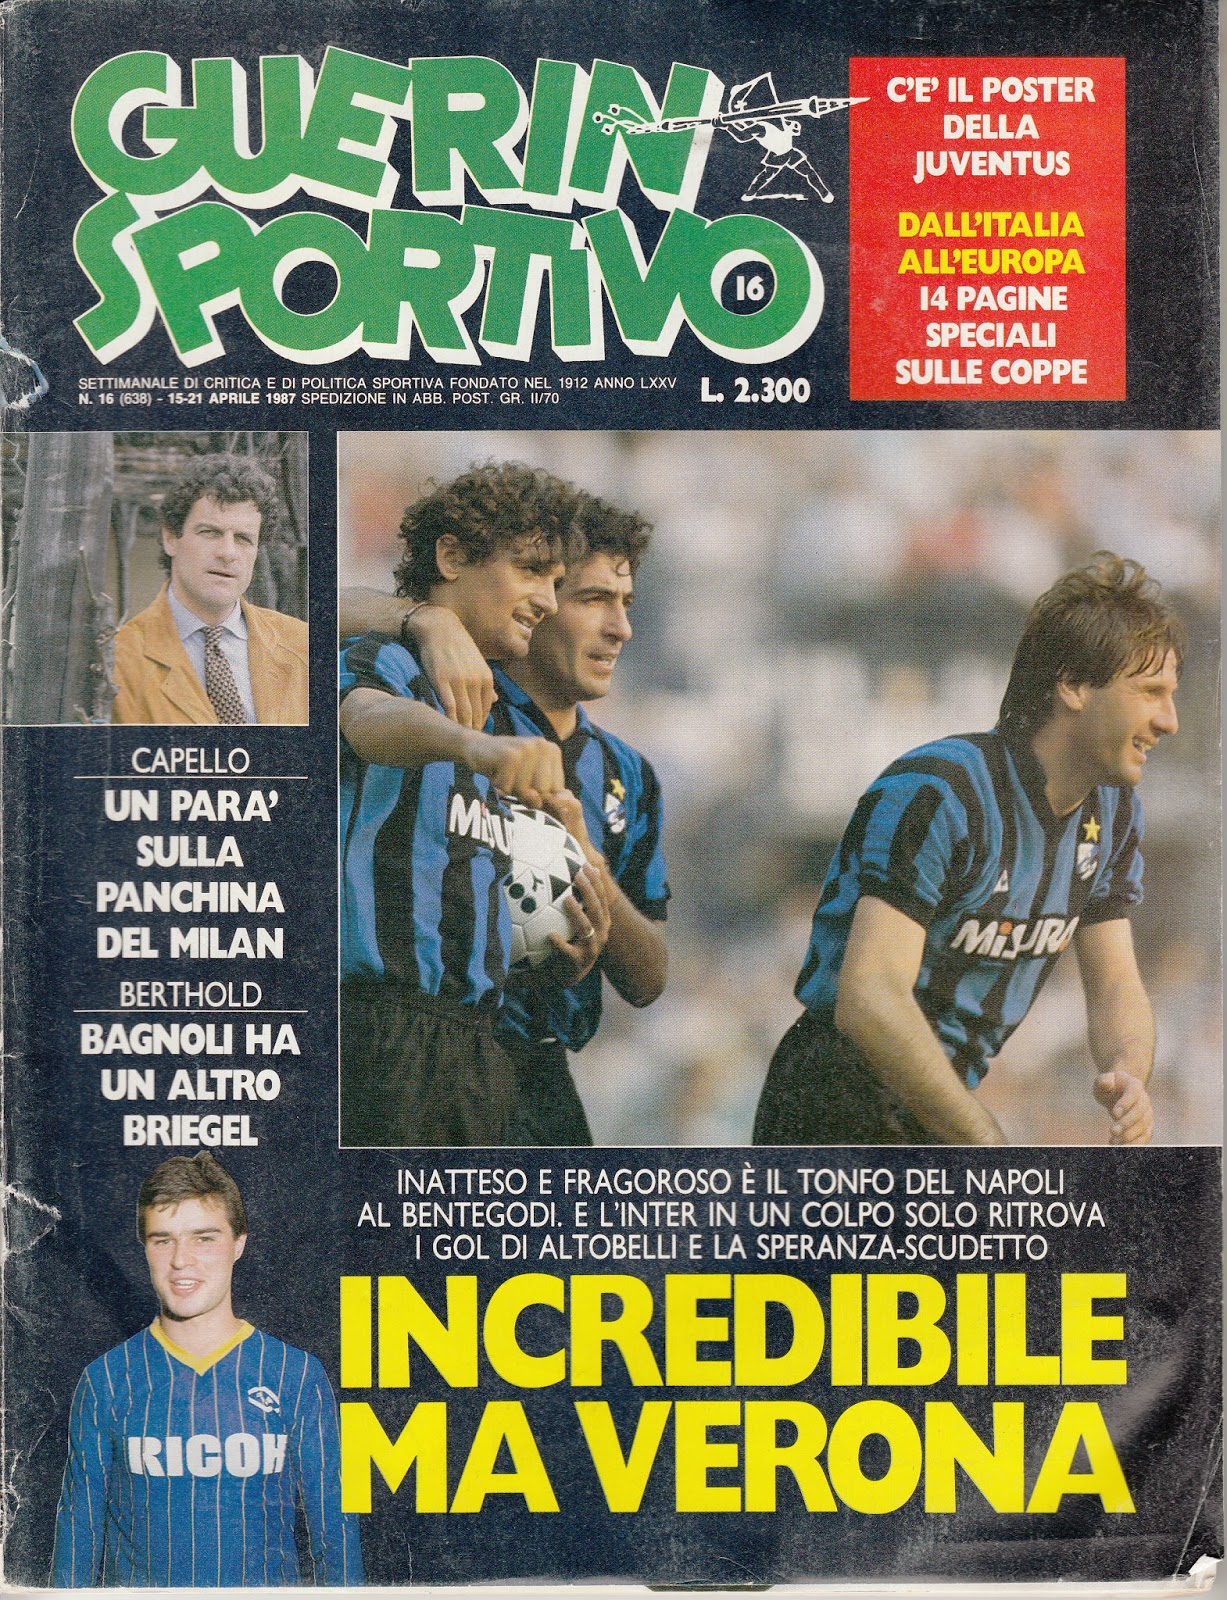 From the Italian magazine Guerin sportivo, a page with the